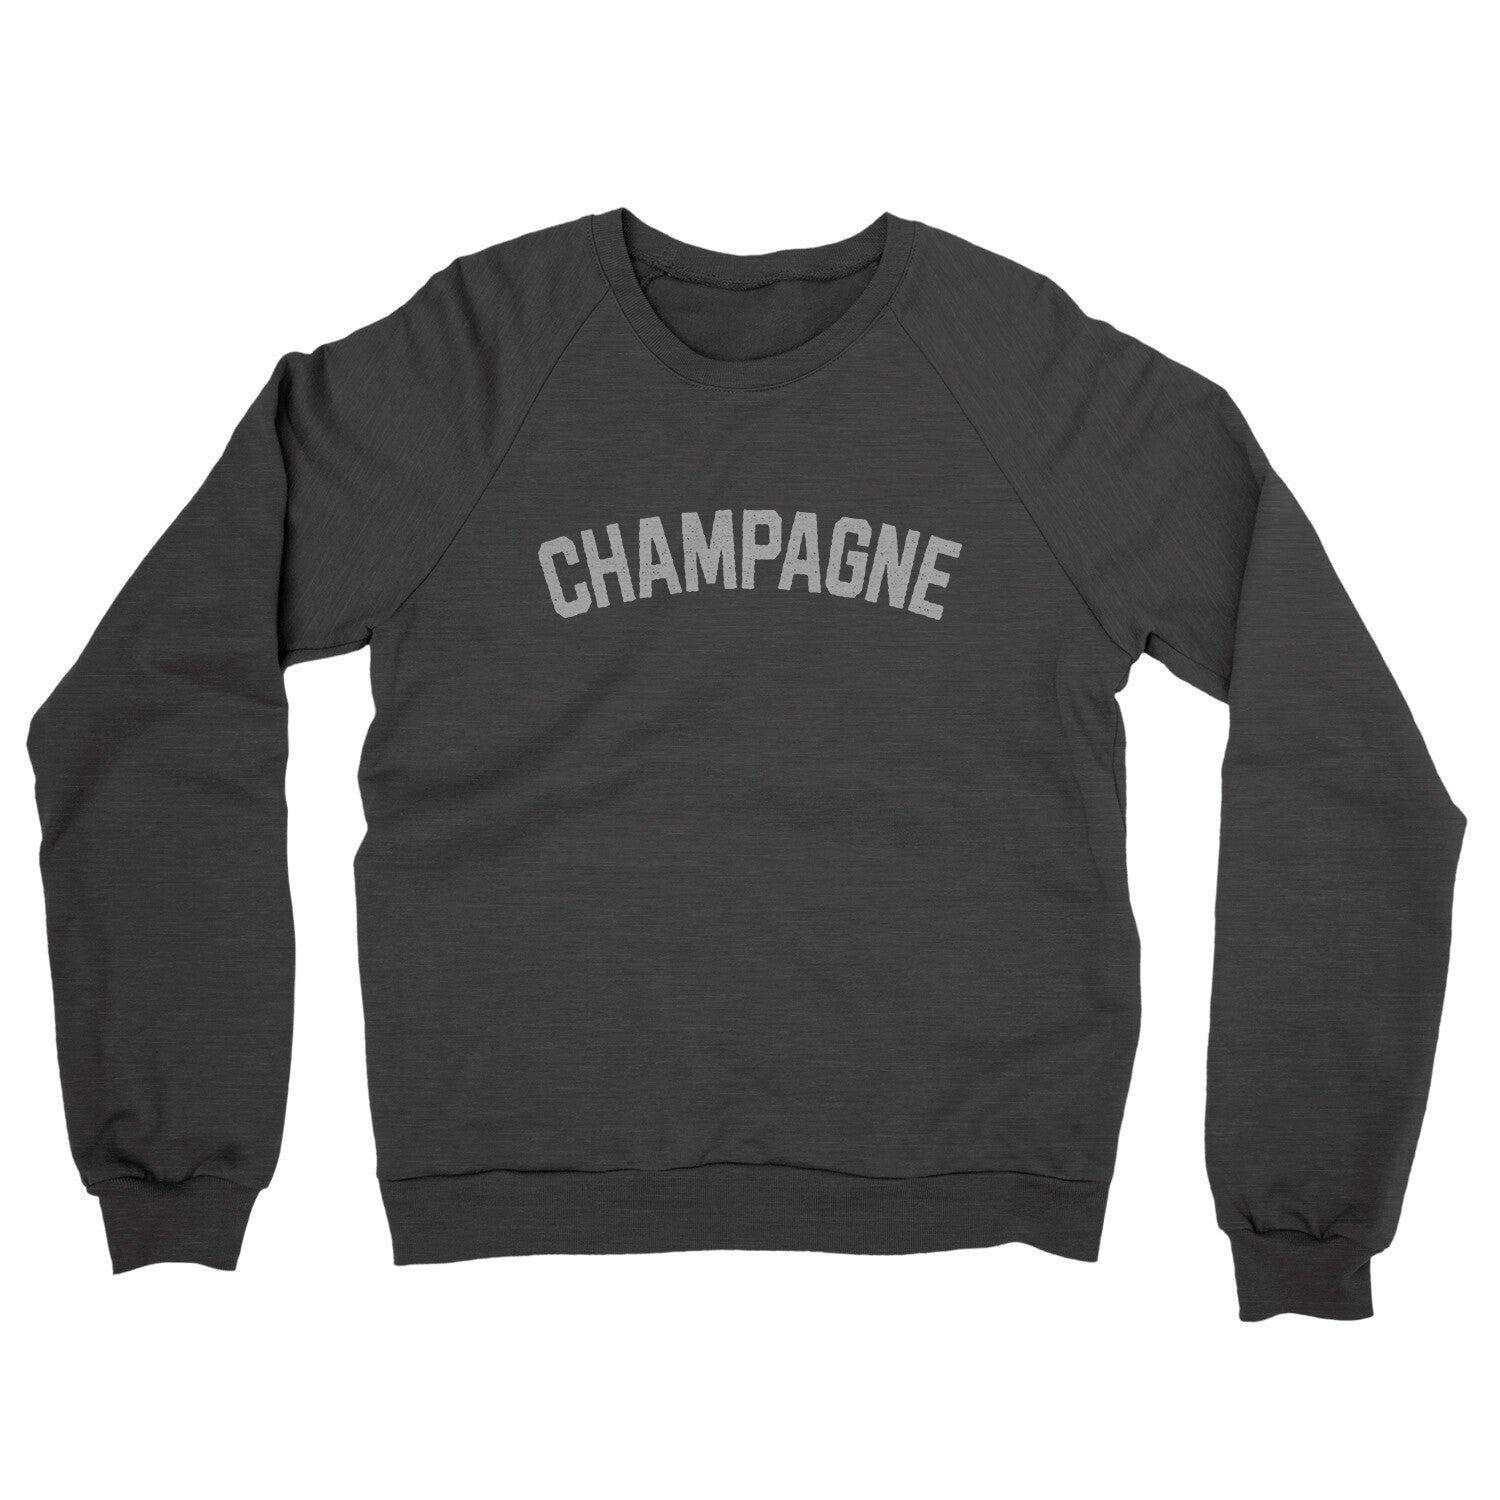 Champagne in Charcoal Heather Color